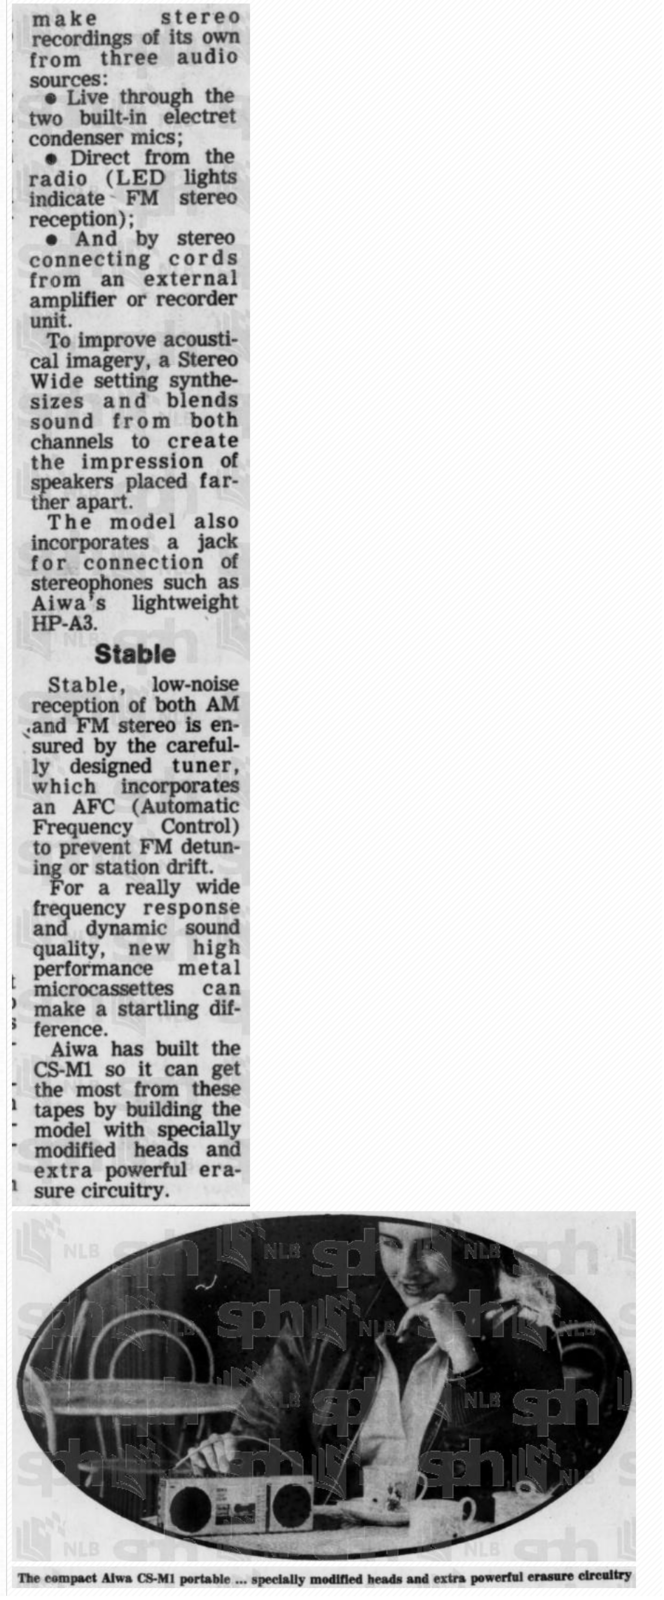 Microcassettes The Straits Times 1981 4.png